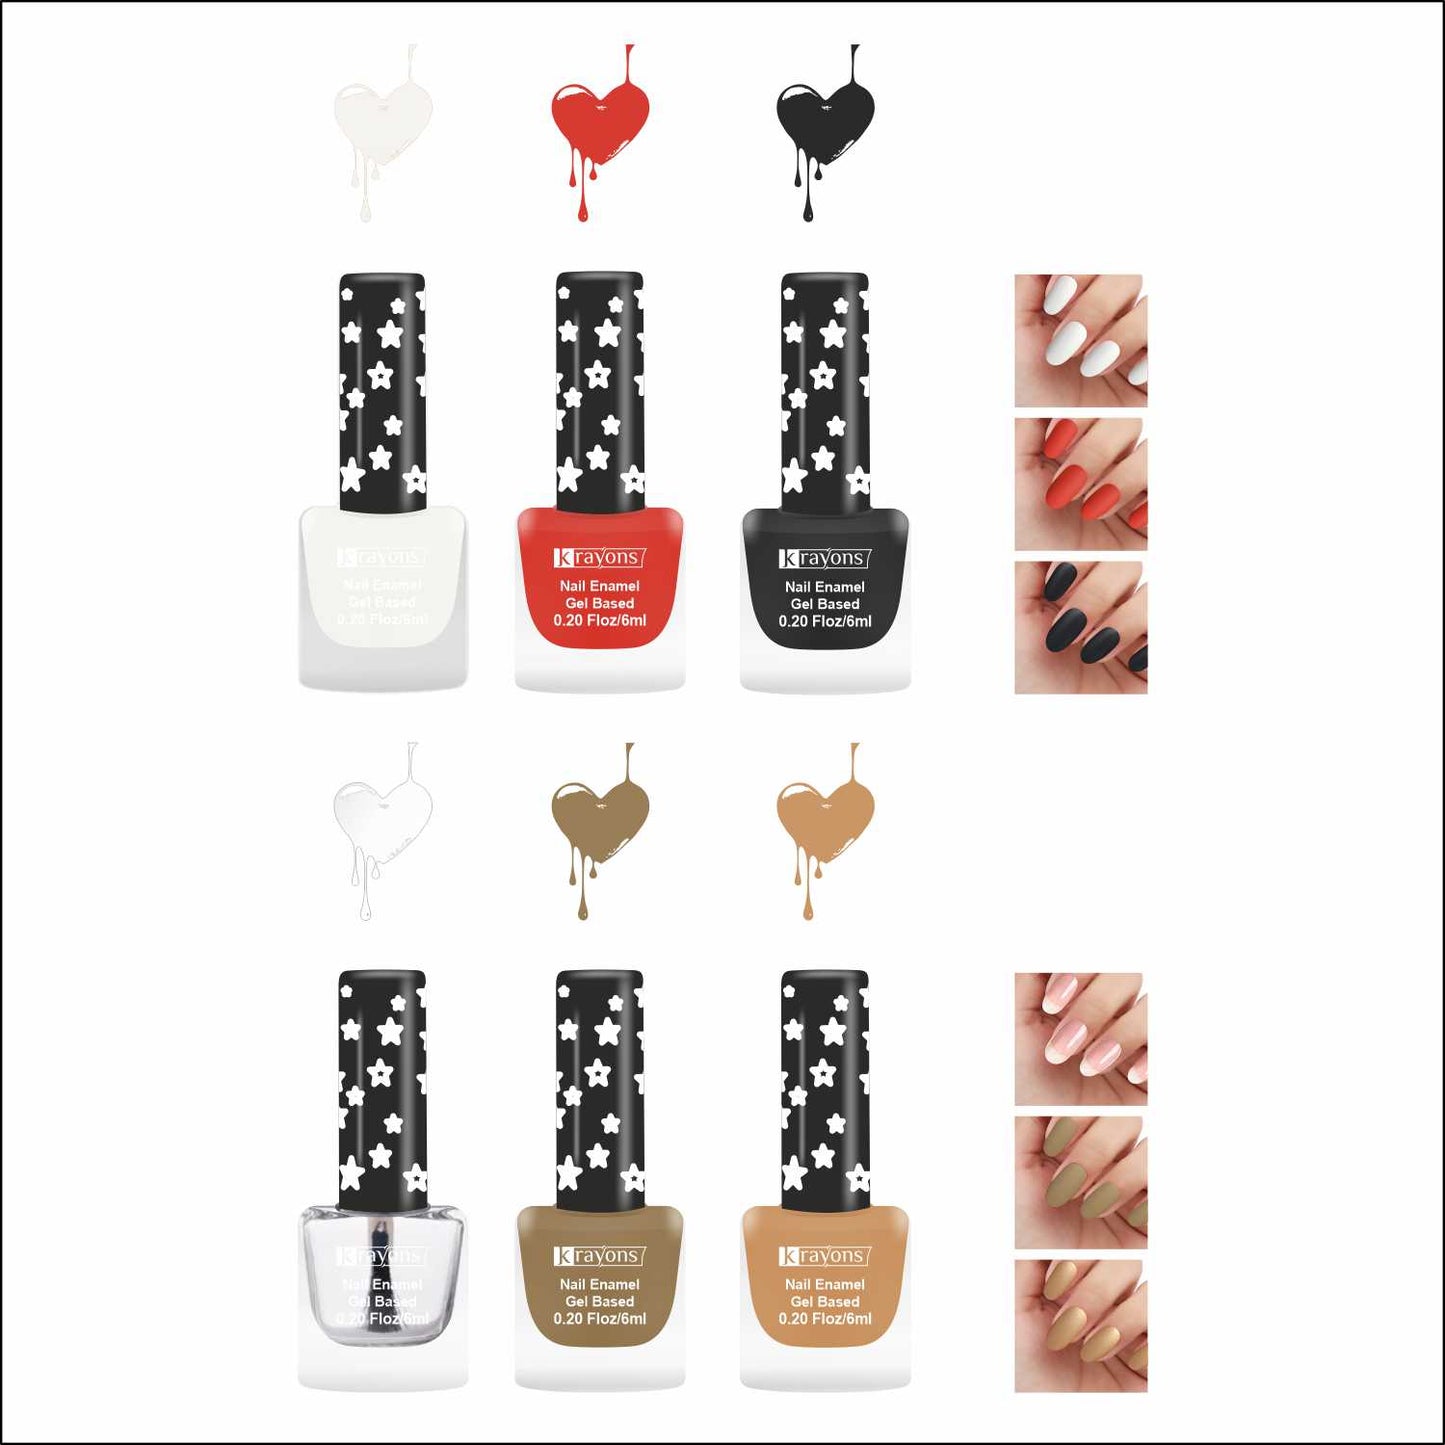 Krayons Cute Super Matte Finish Nail Enamel, Quick Dry, LongLasting, Multicolor, 6ml Each (Pack of 6)